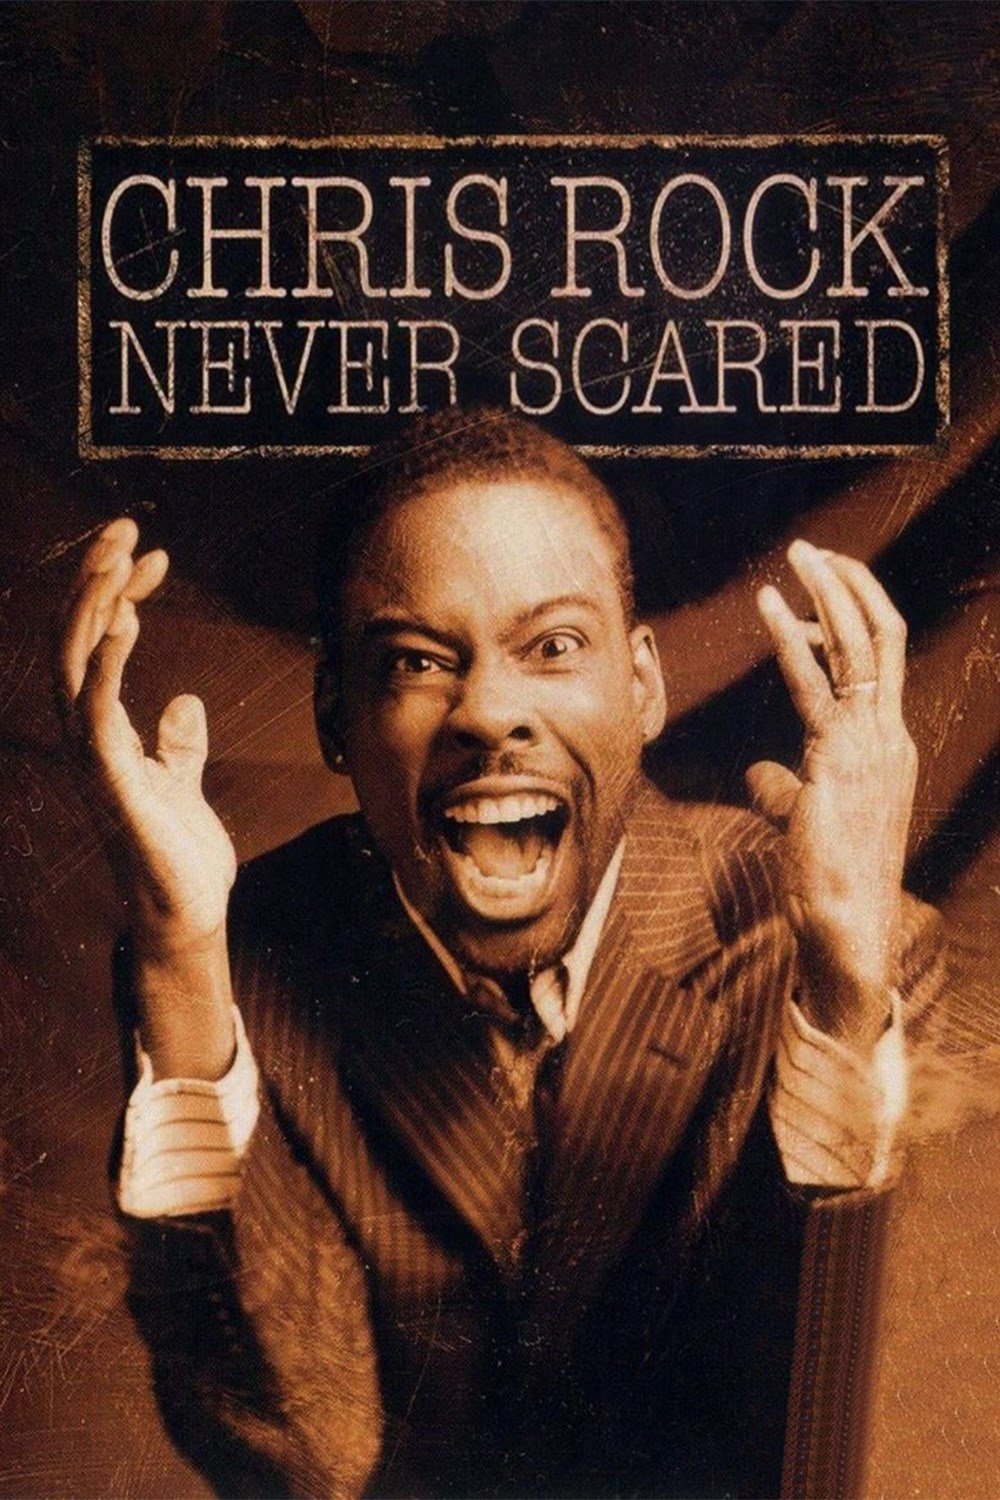 Poster of the movie Chris Rock: Never Scared